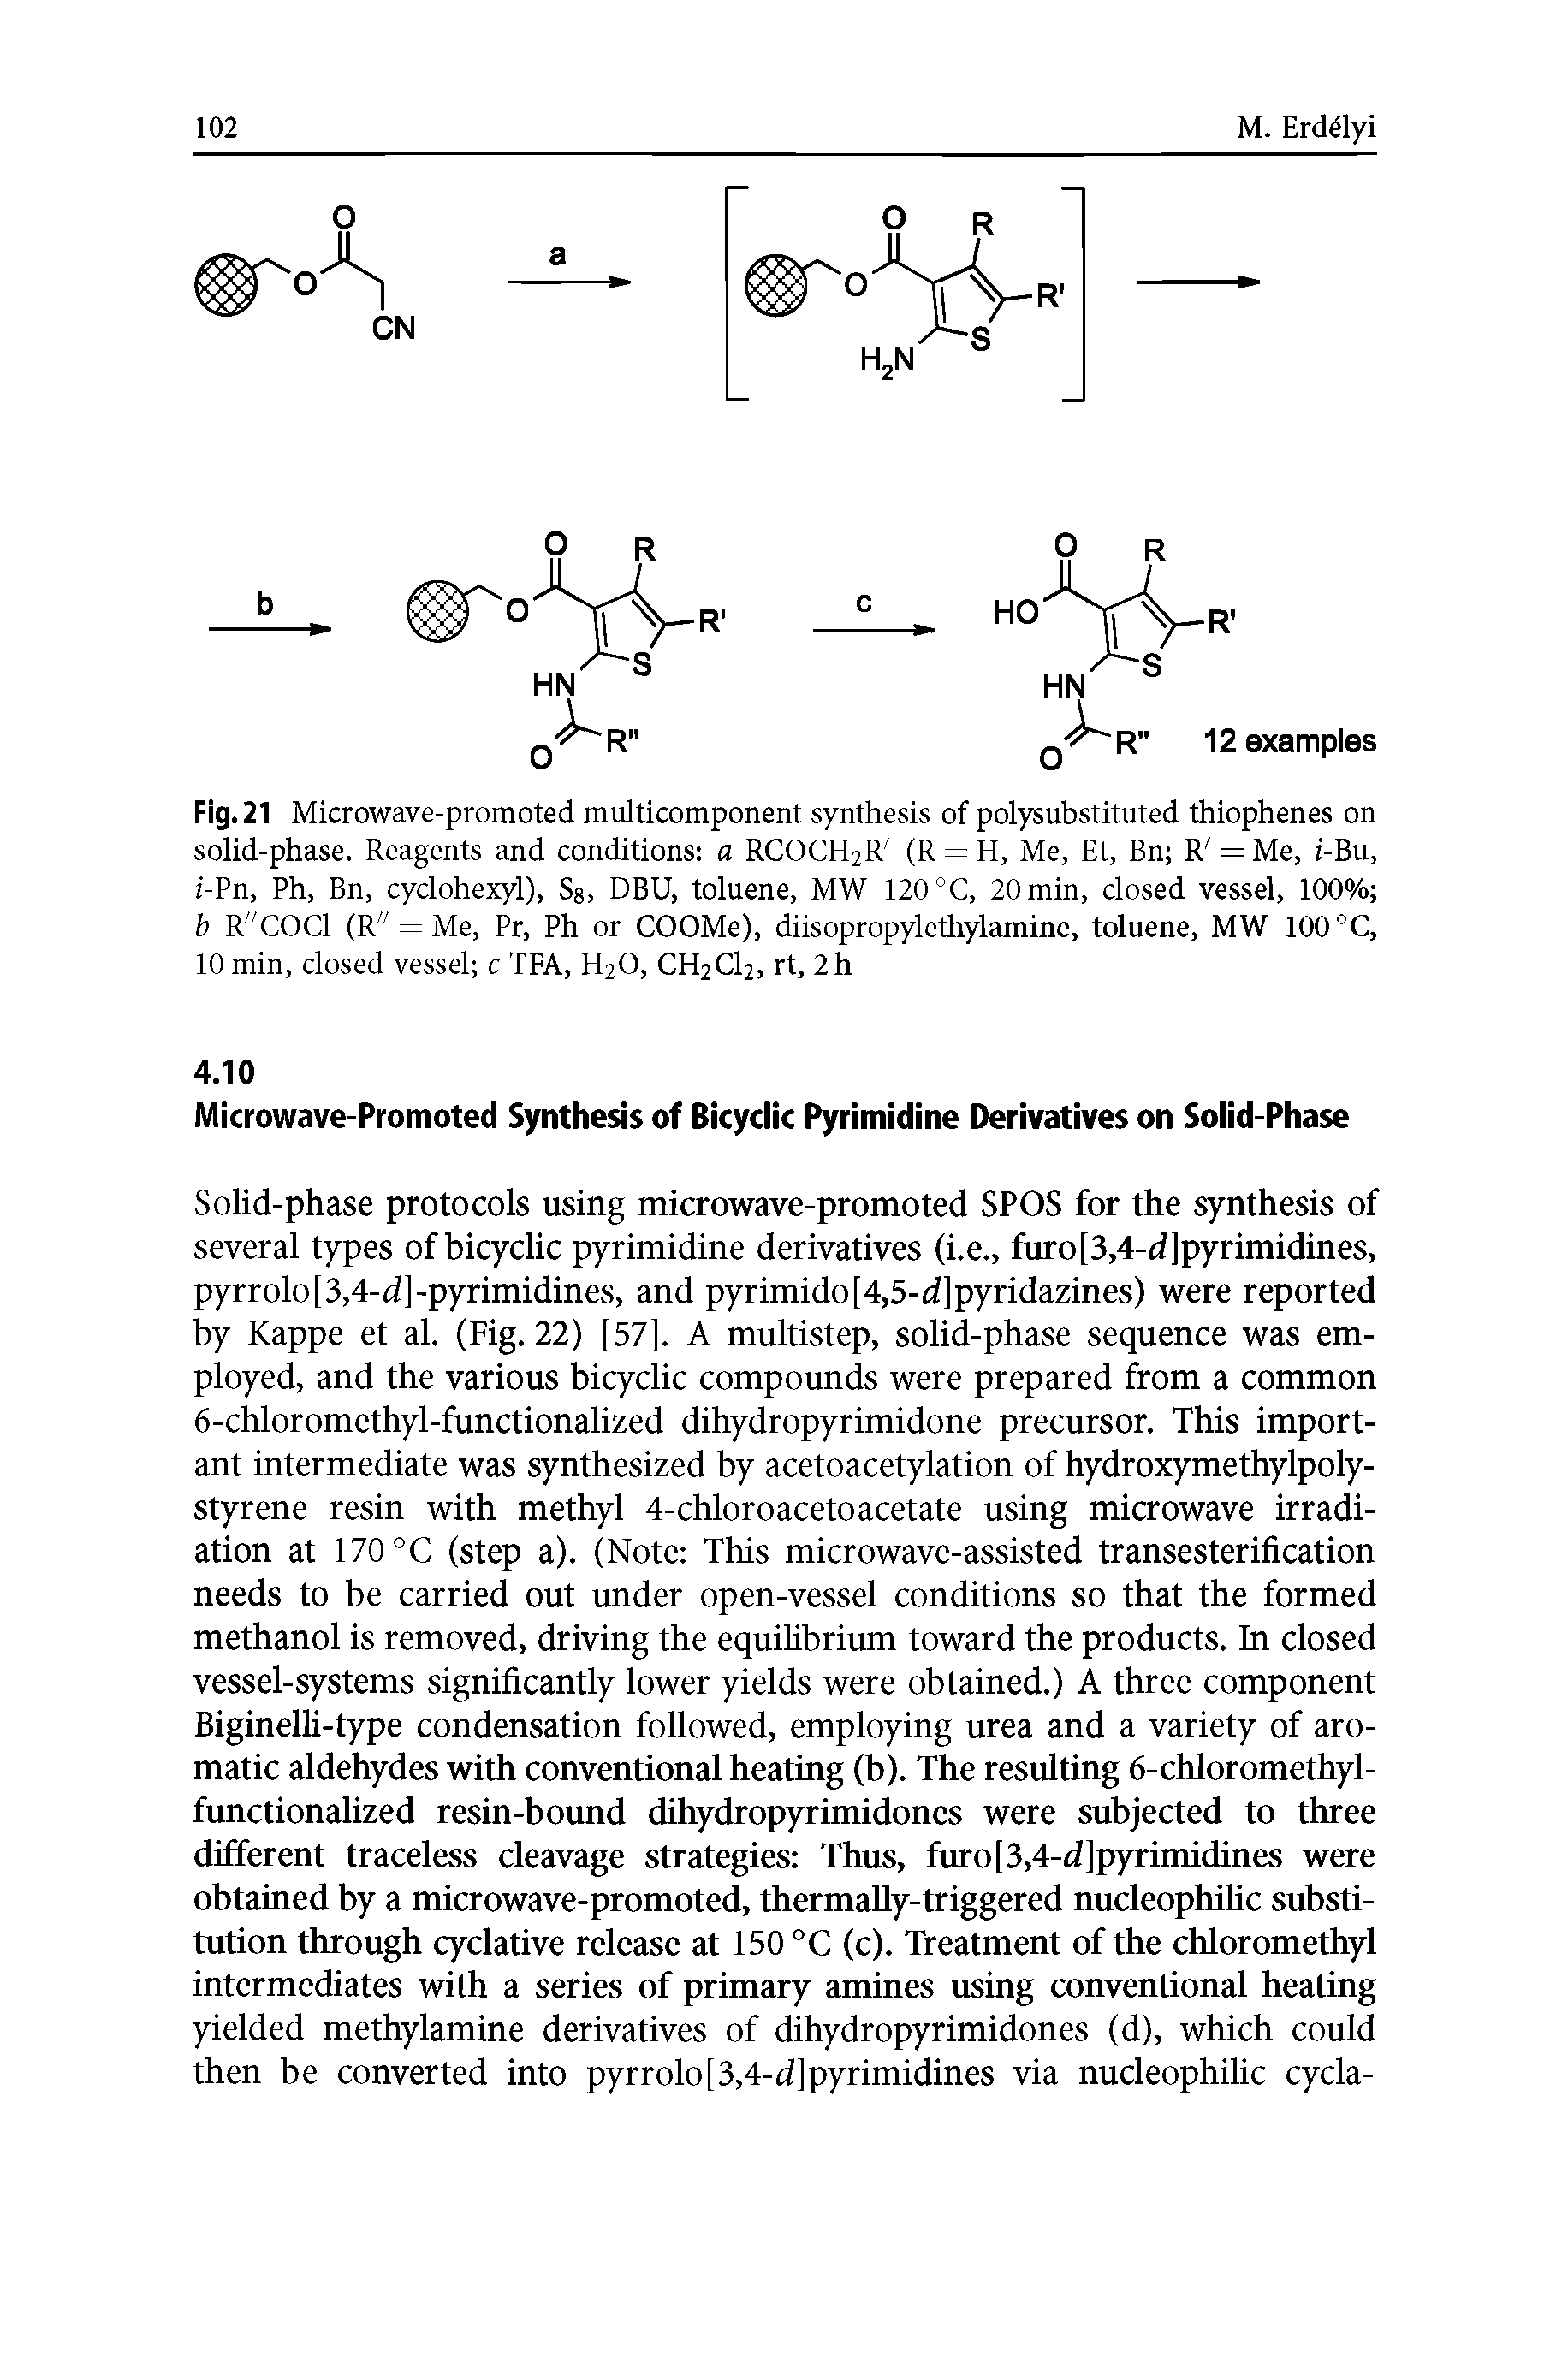 Fig. 21 Microwave-promoted multicomponent synthesis of polysubstituted thiophenes on solid-phase. Reagents and conditions a RCOCH2R (R = H, Me, Et, Bn R = Me, i-Bu, i-Pn, Ph, Bn, cyclohexyl), Ss, DBU, toluene, MW 120 °C, 20 min, closed vessel, 100% b R"COCl (R" = Me, Pr, Ph or COOMe), diisopropylethylamine, toluene, MW 100 °C, 10 min, closed vessel c TEA, H2O, CH2CI2, rt, 2h...